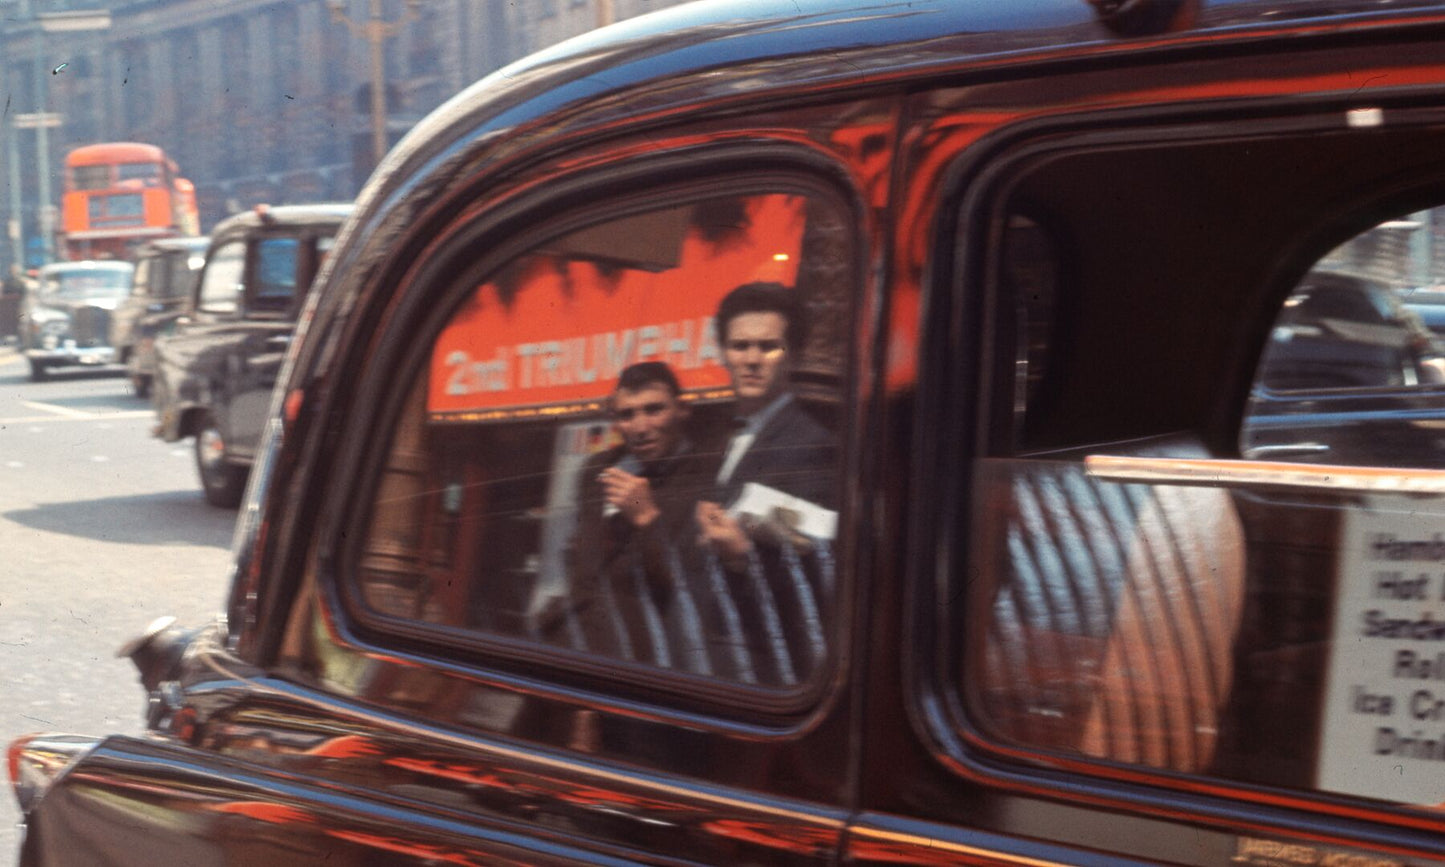 Two Men Reflected In A London Taxi by Bob Hyde - 1960s